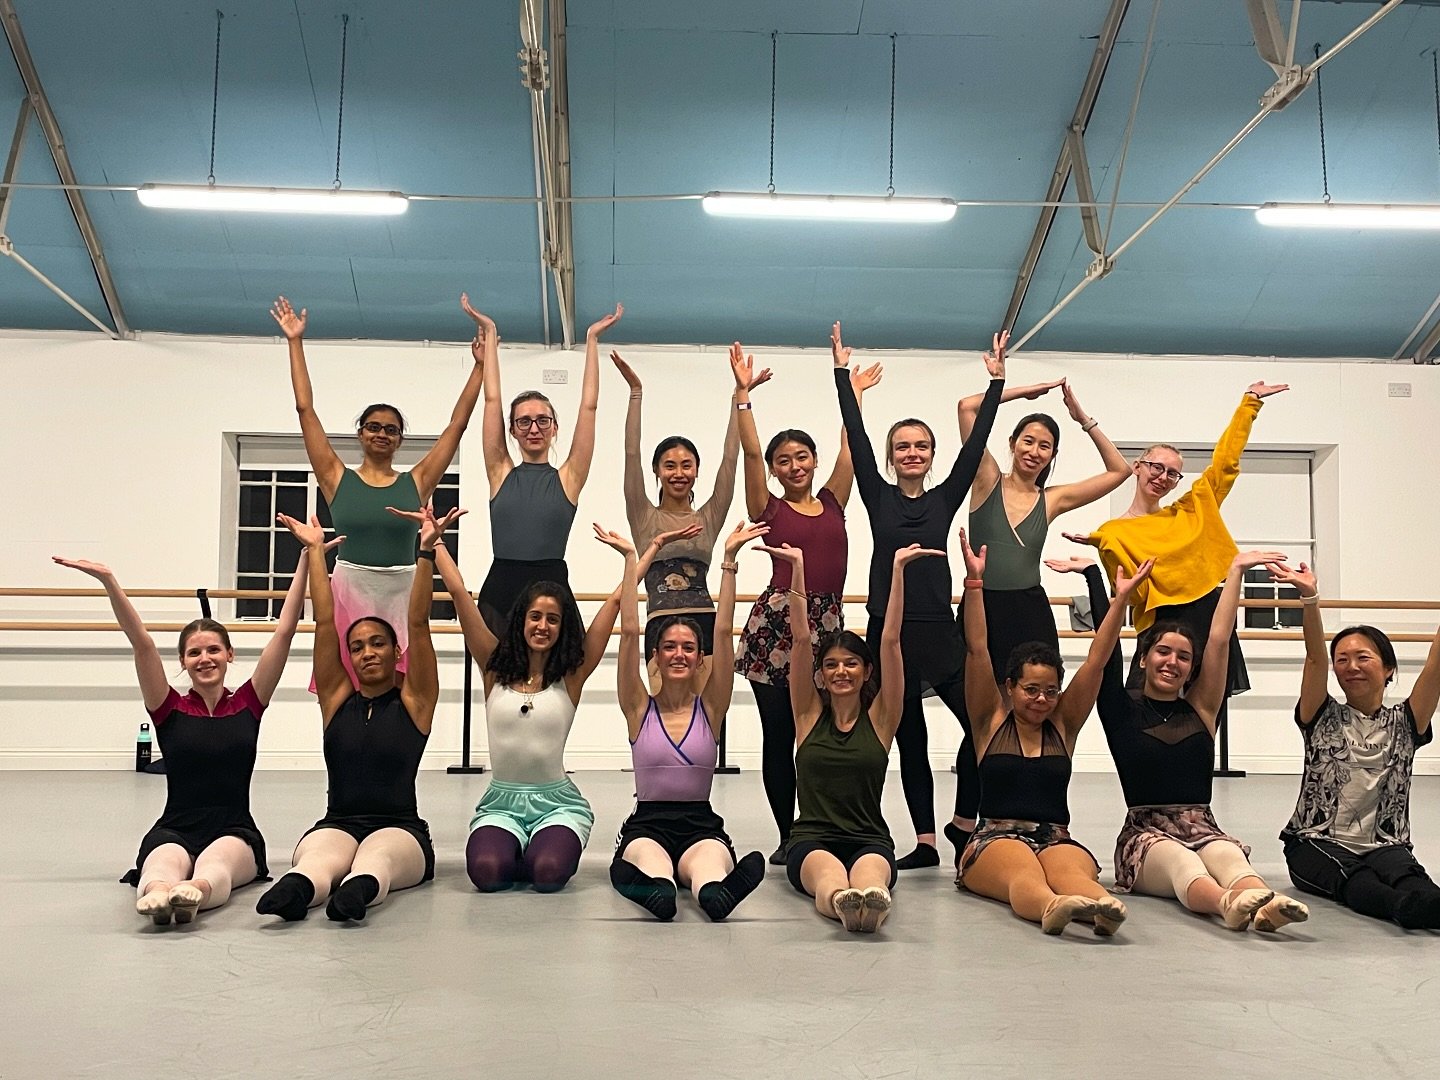 Throwback to a special workshop at our Winter Intensive ❤️

Excited to welcome @nandidevi back to host our &lsquo;Juliet Reimagined&rsquo; workshop at our next weekend intensive this June :)